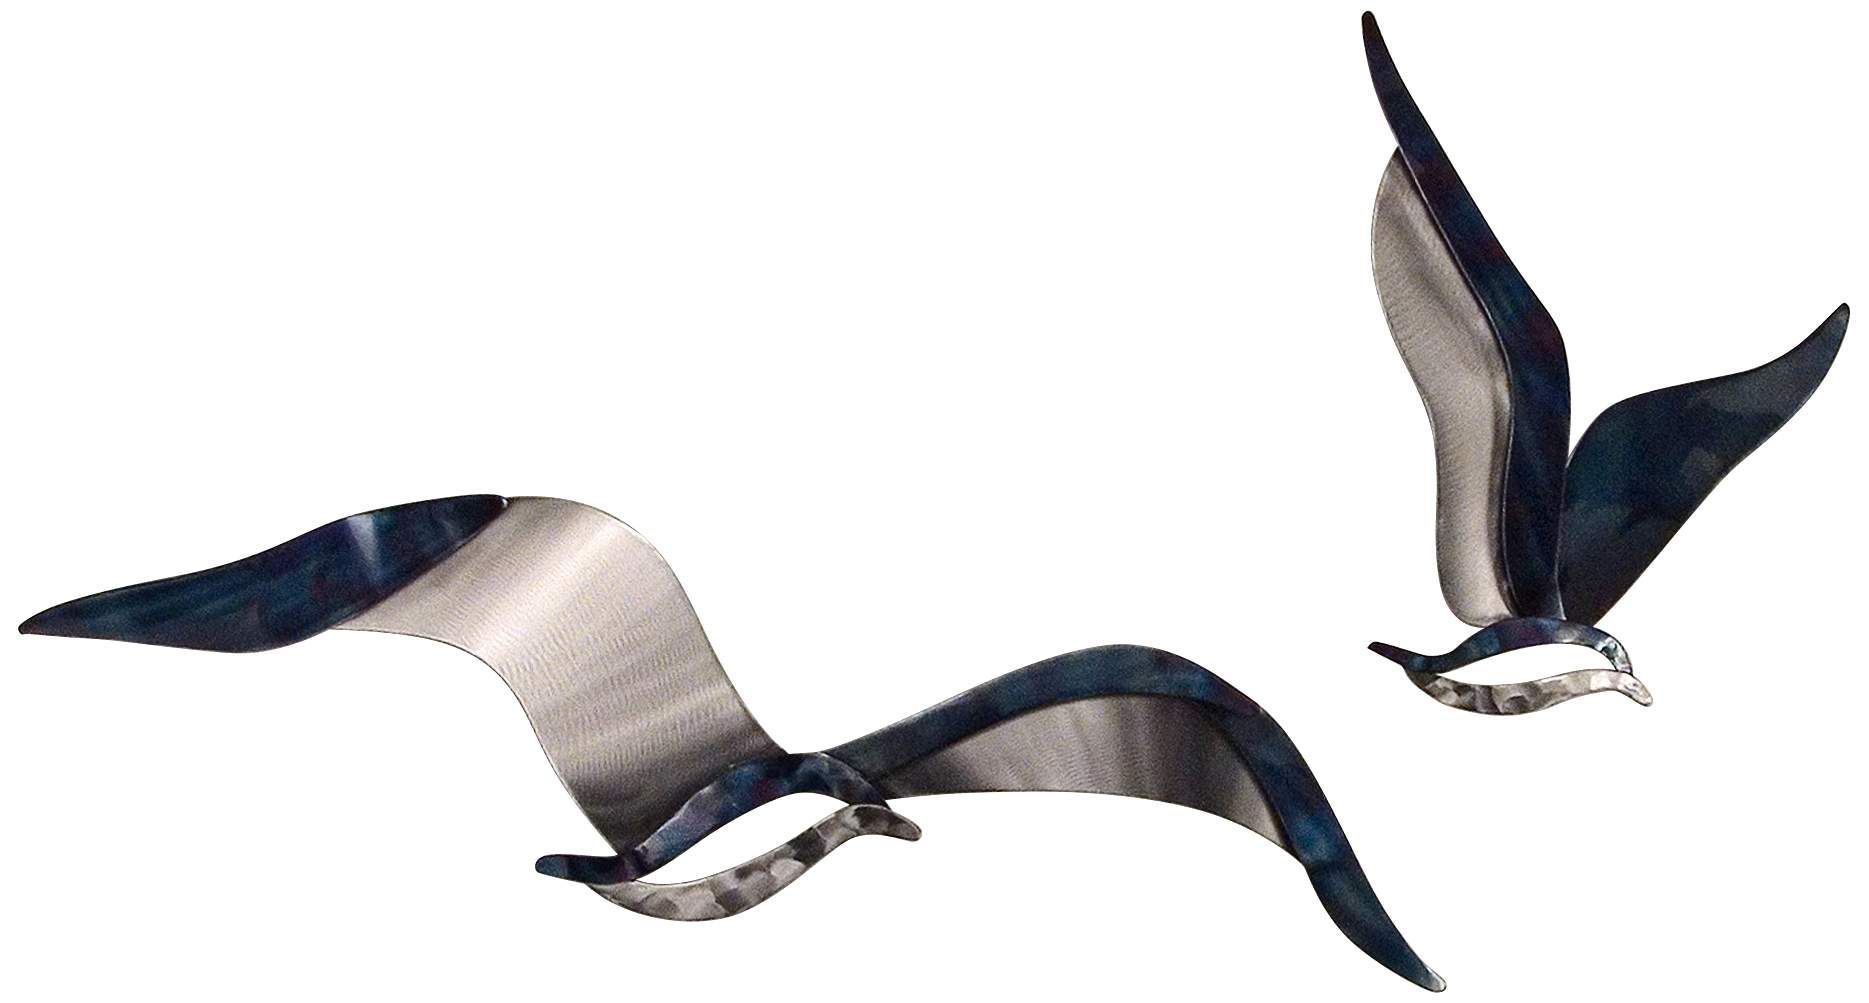 Seagulls 2 Piece 24 Inch High Metal Wall Art In 2020 | Metal Wall Art Intended For Seagulls Metal Wall Art (View 12 of 15)